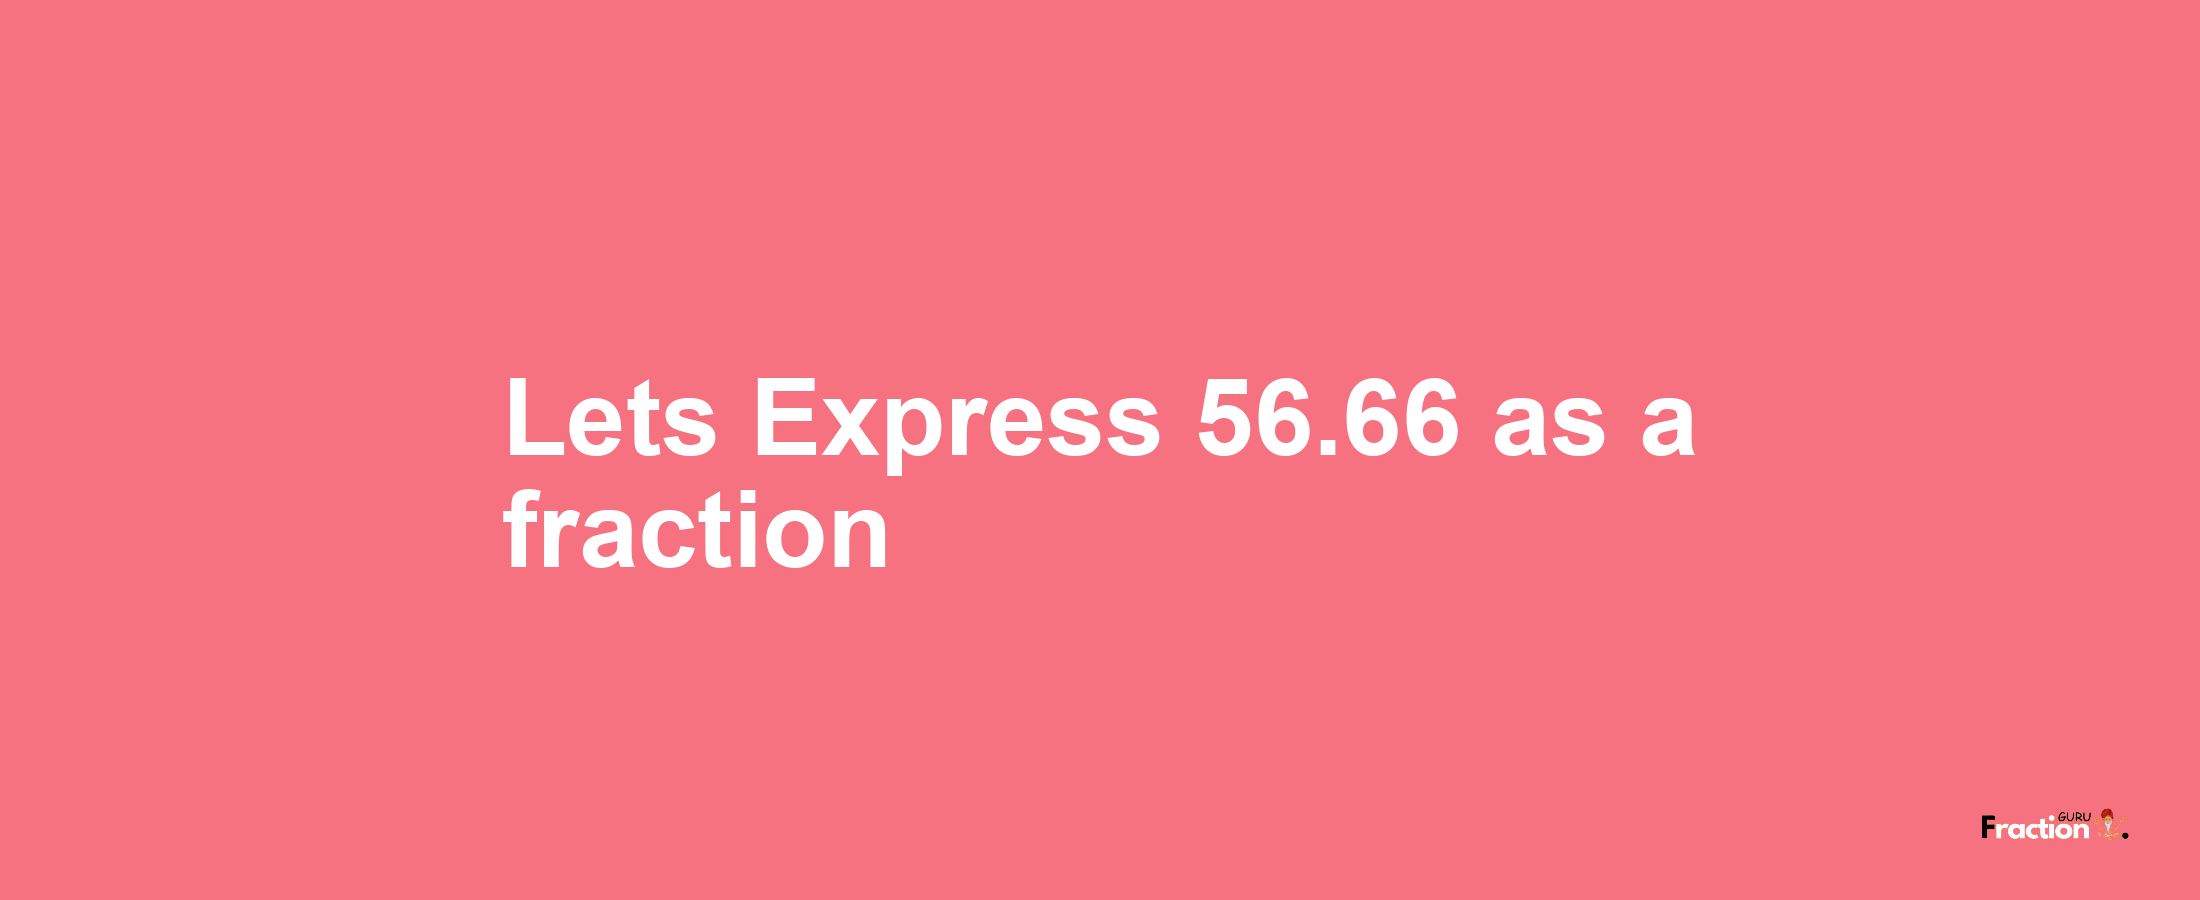 Lets Express 56.66 as afraction